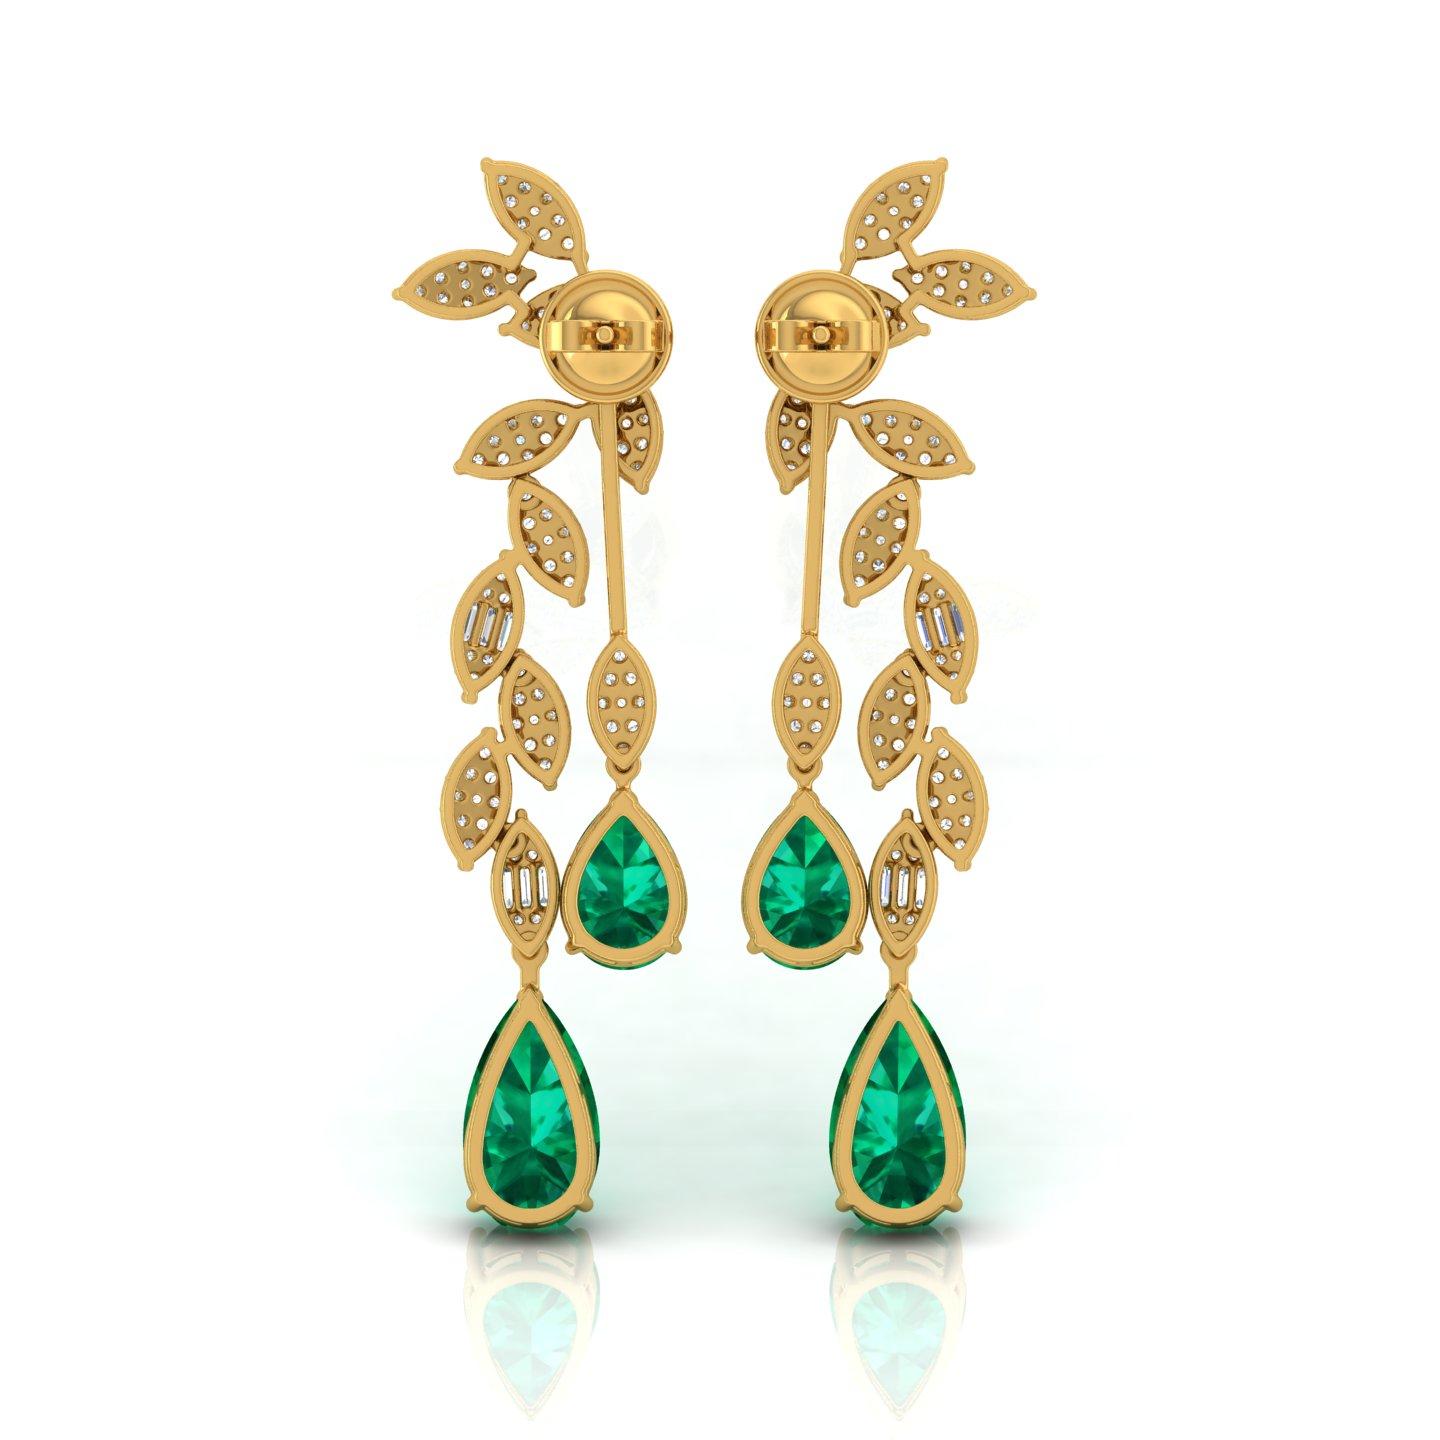 Item Code :- CN-23993
Gross Wt :- 20.20 gm
18k Yellow Gold Wt :- 18.69 gm
Diamond Wt :- 4 Ct  ( AVERAGE DIAMOND CLARITY SI1-SI2 & COLOR H-I )
Emerald Wt :- 3.55 Ct
Earrings Size :- 59.09x25.51 mm approx.
✦ Sizing
.....................
We can adjust